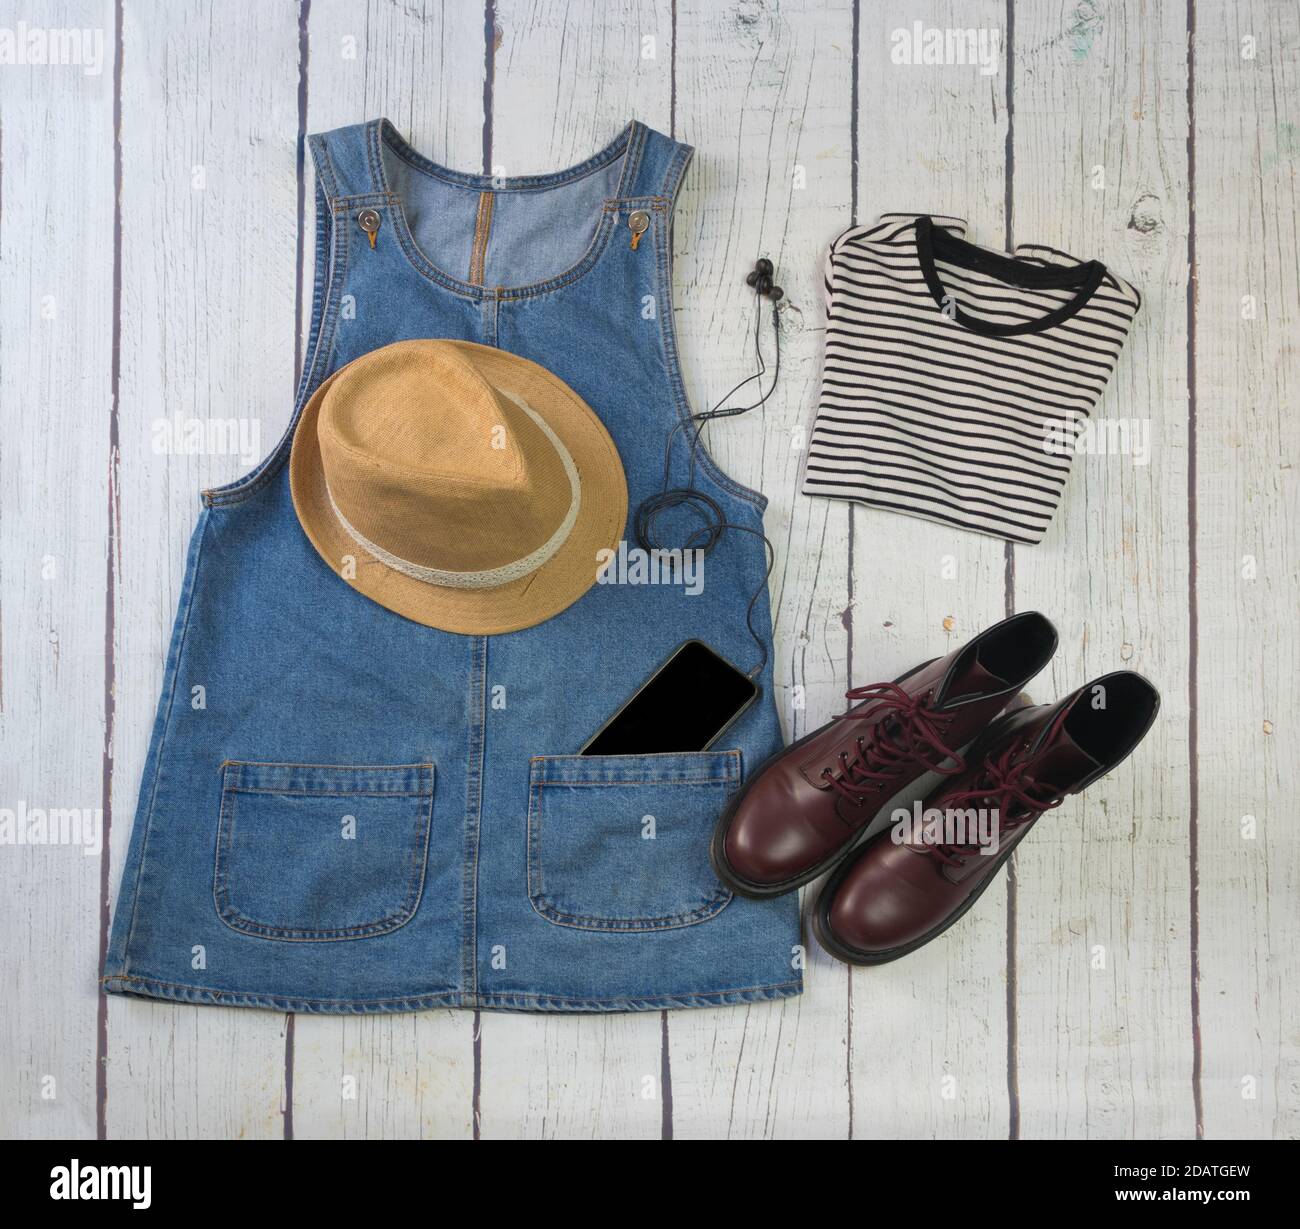 https://c8.alamy.com/comp/2DATGEW/still-life-of-clothes-denim-skirt-with-dungarees-striped-shirt-military-boots-hat-smartphone-and-headphones-on-a-white-wooden-background-2DATGEW.jpg